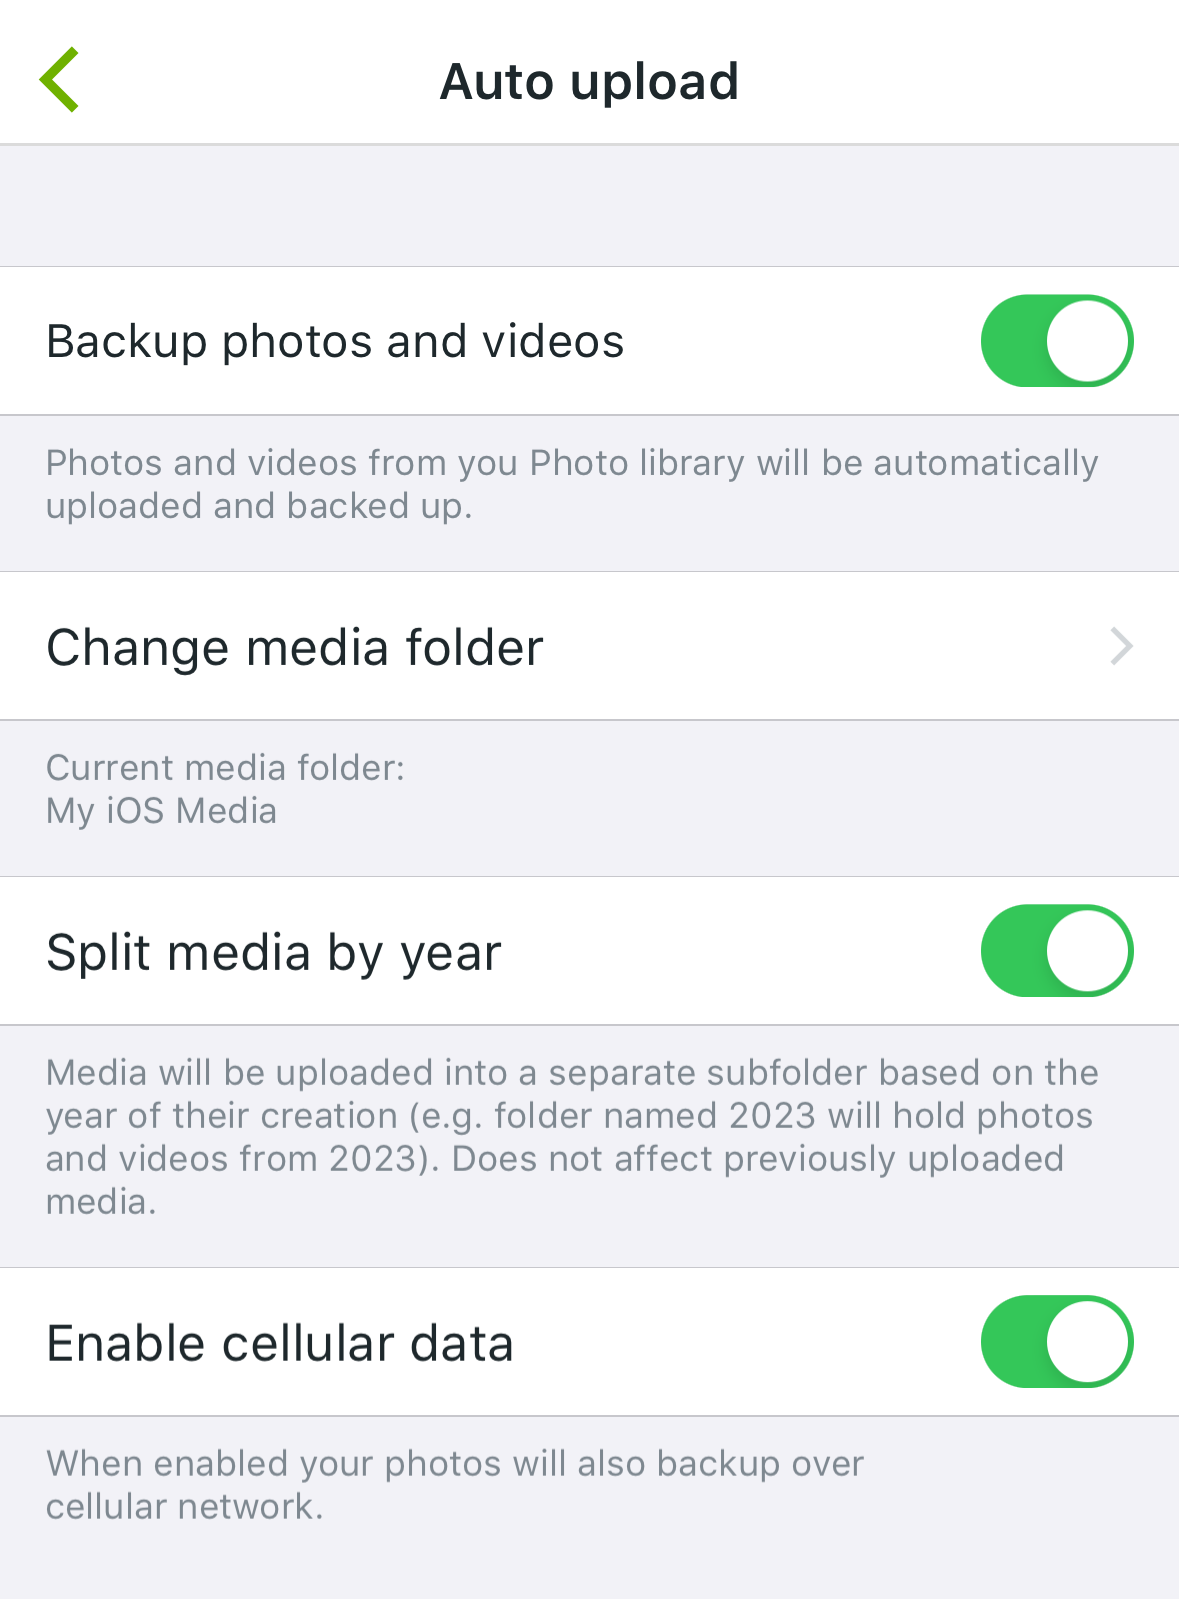 Auto upload settings menu in the Koofr app for iOS.